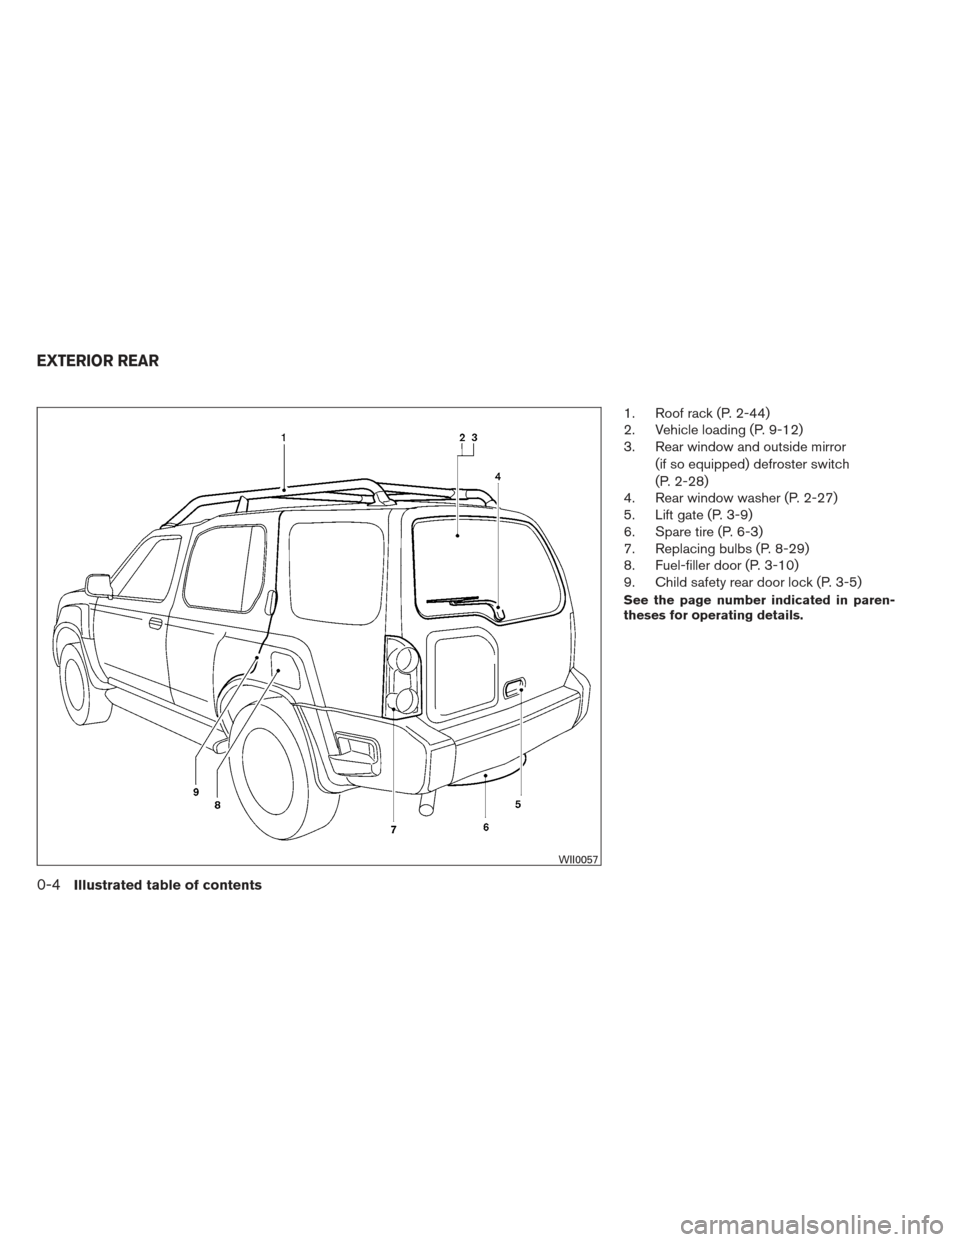 NISSAN XTERRA 2013 N50 / 2.G Owners Manual 1. Roof rack (P. 2-44)
2. Vehicle loading (P. 9-12)
3. Rear window and outside mirror(if so equipped) defroster switch
(P. 2-28)
4. Rear window washer (P. 2-27)
5. Lift gate (P. 3-9)
6. Spare tire (P.